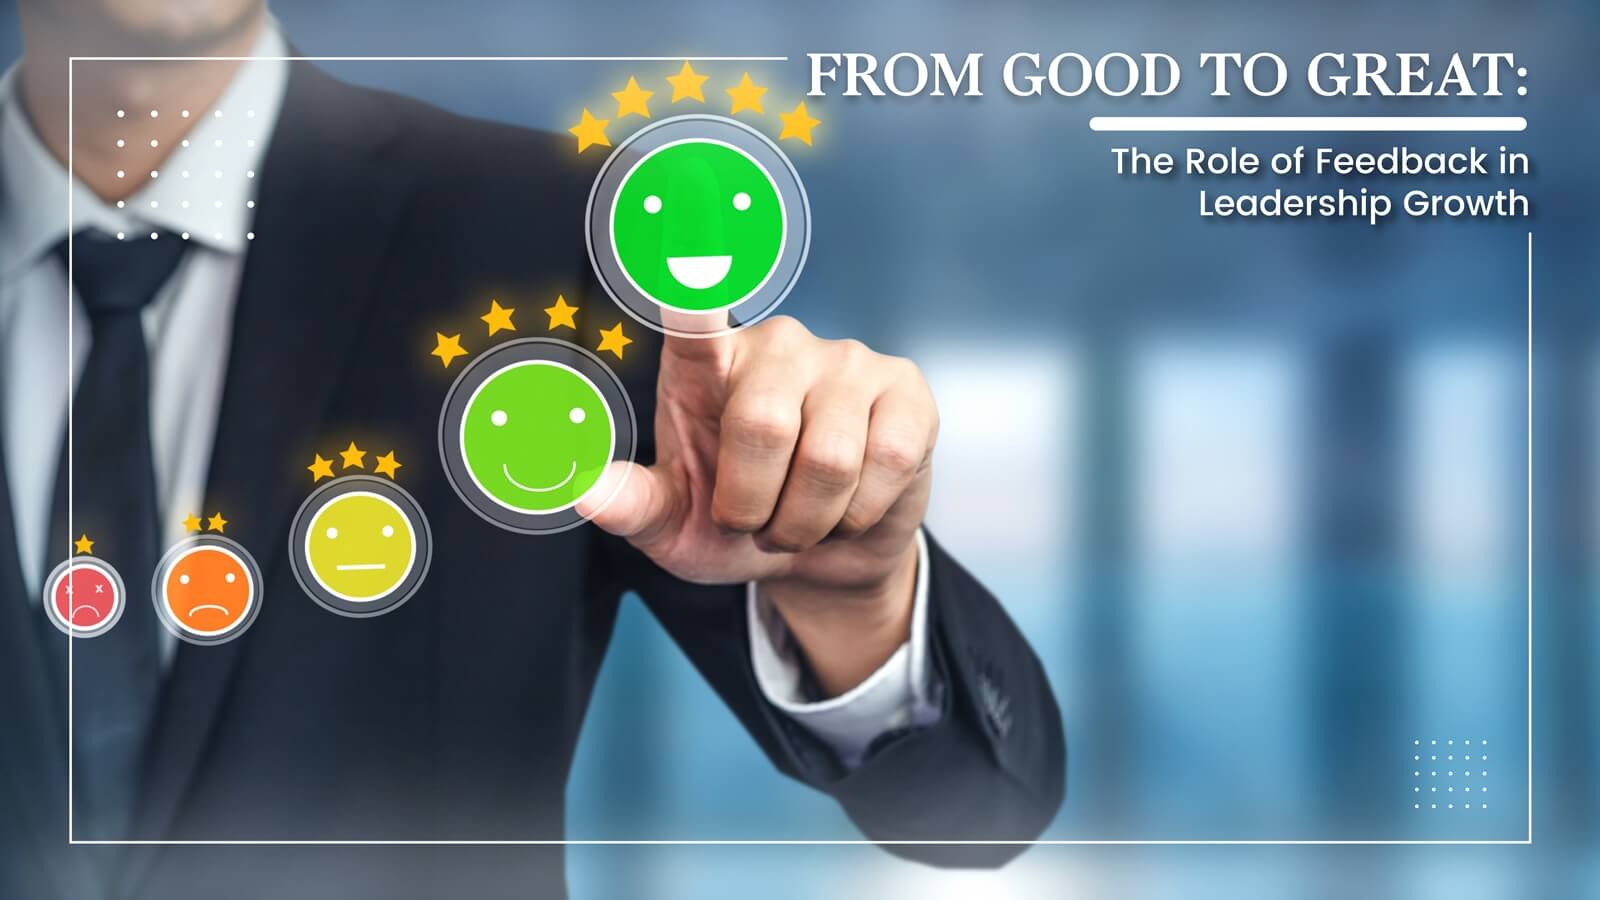 From Good to Great: The Role of Feedback in Leadership Growth